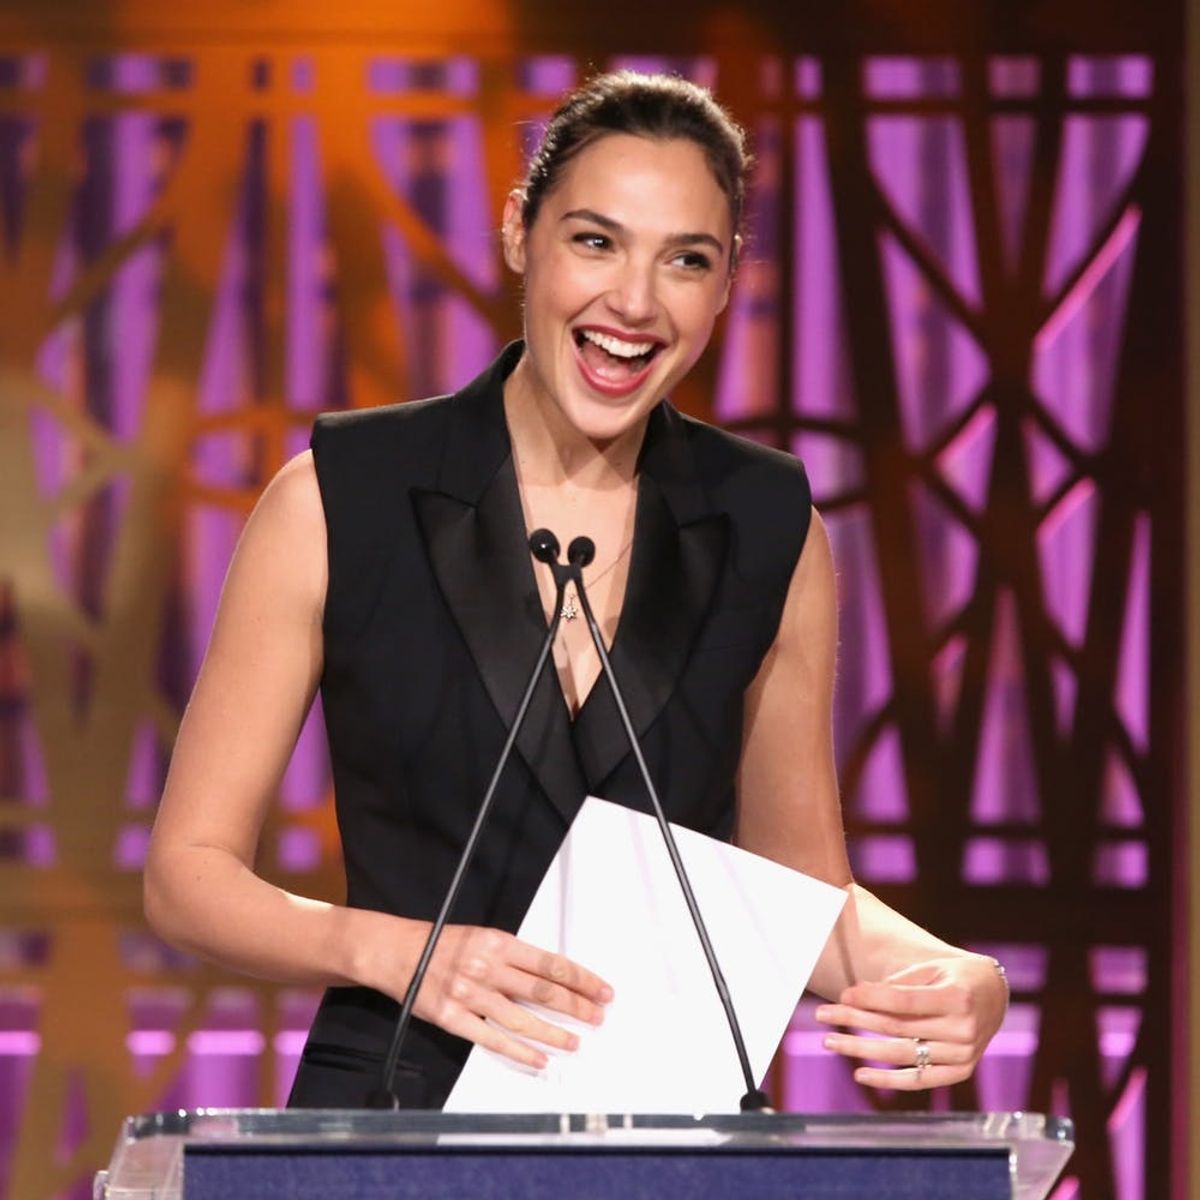 Gal Gadot Surprised a College Student With a “Wonder Woman” Scholarship